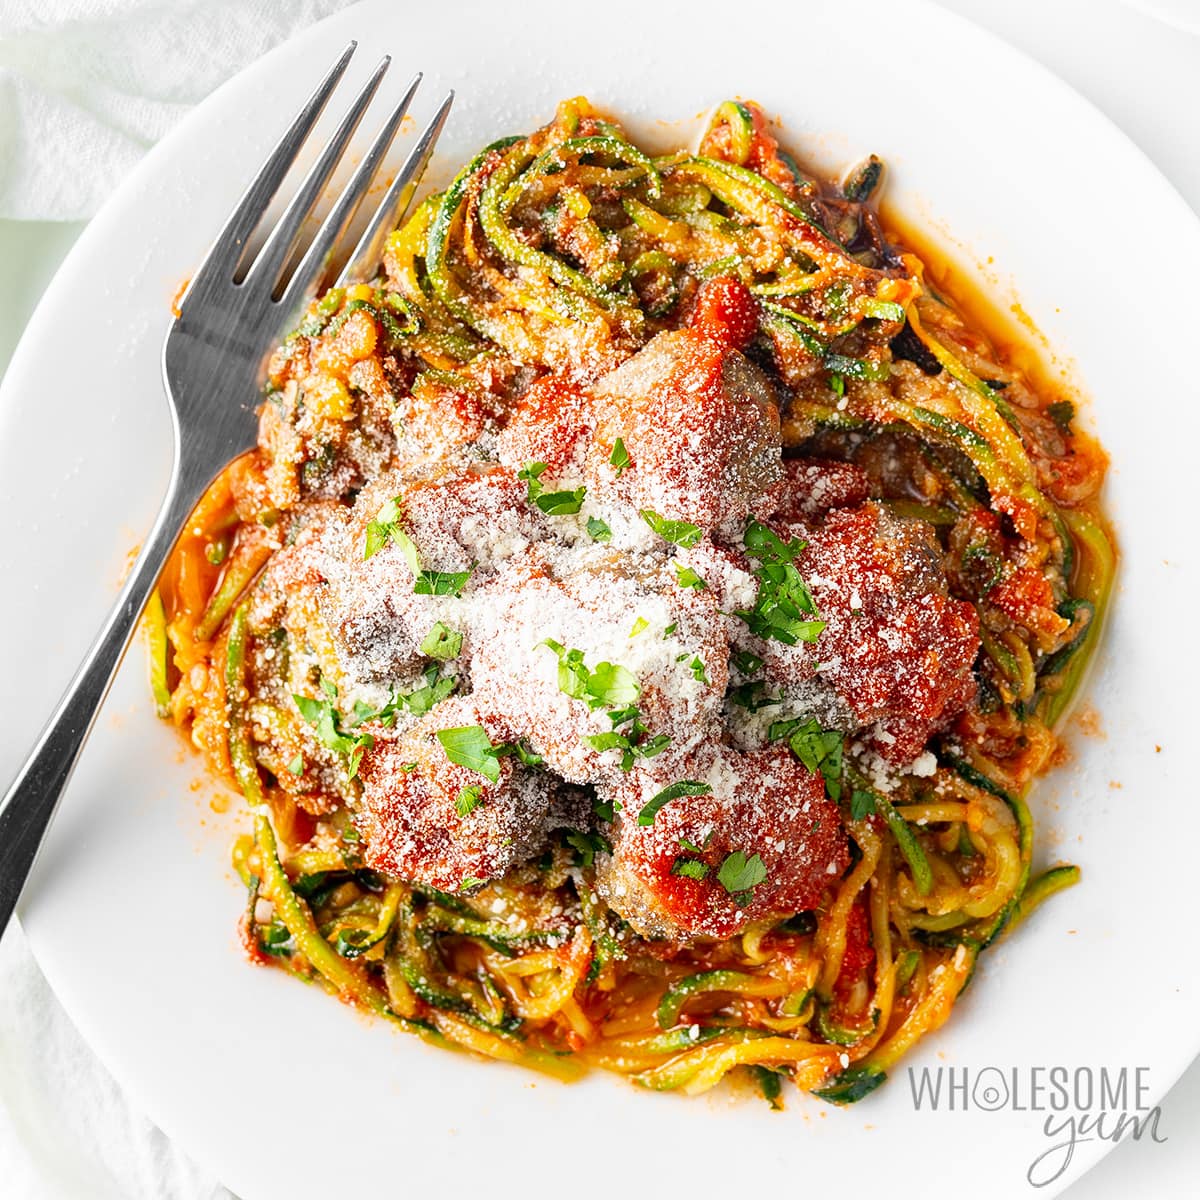 Zucchini spaghetti on a plate with grated parmesan.